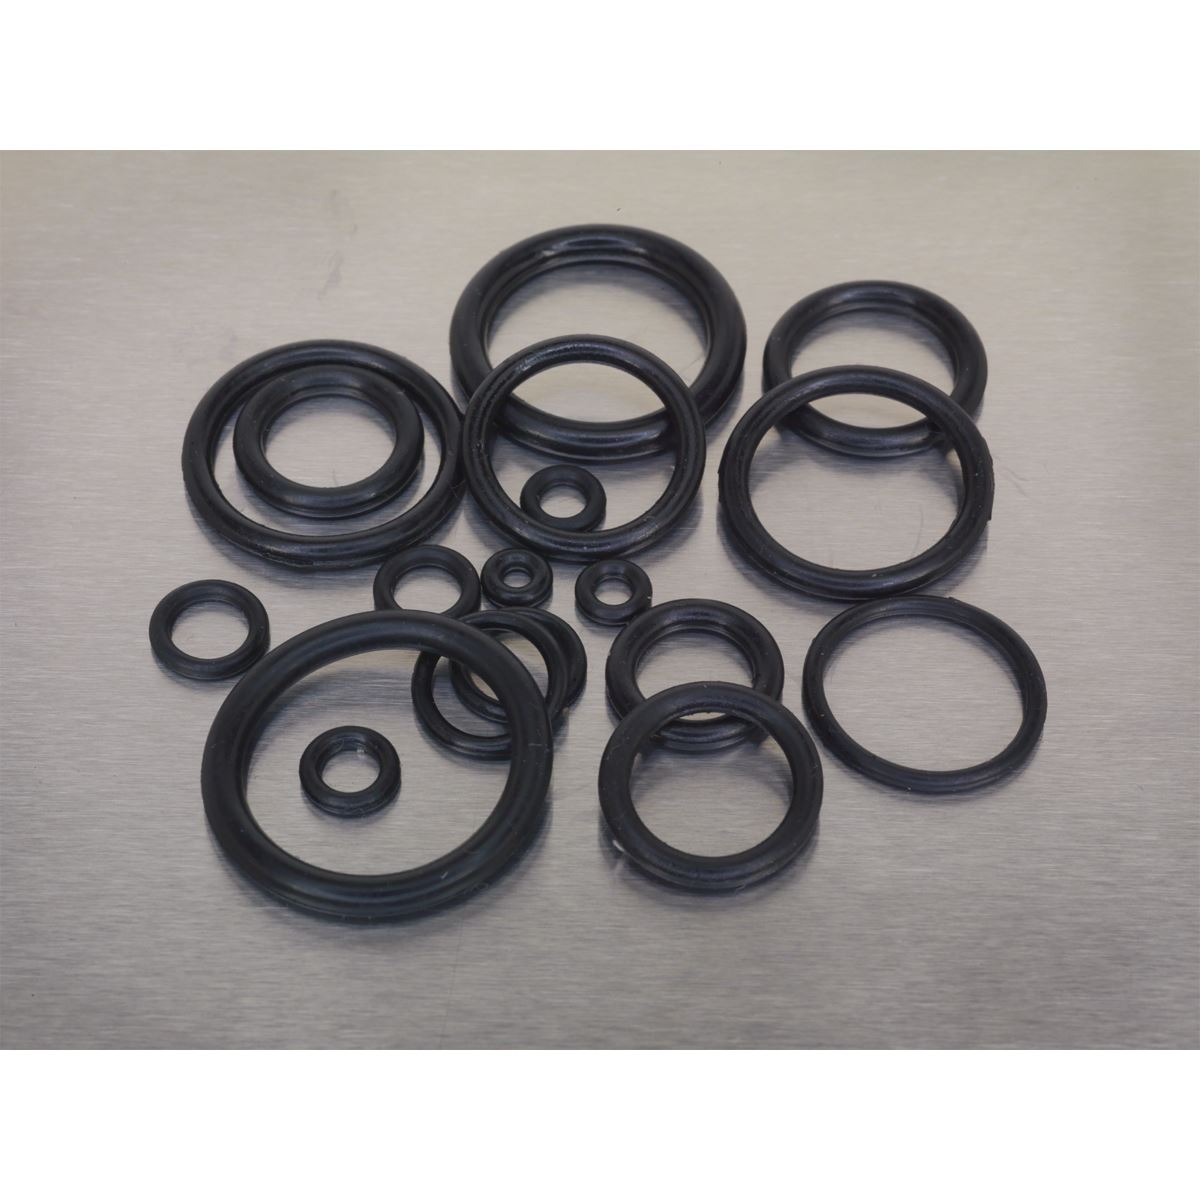 Sealey Rubber O-Ring Assortment 225pc Metric